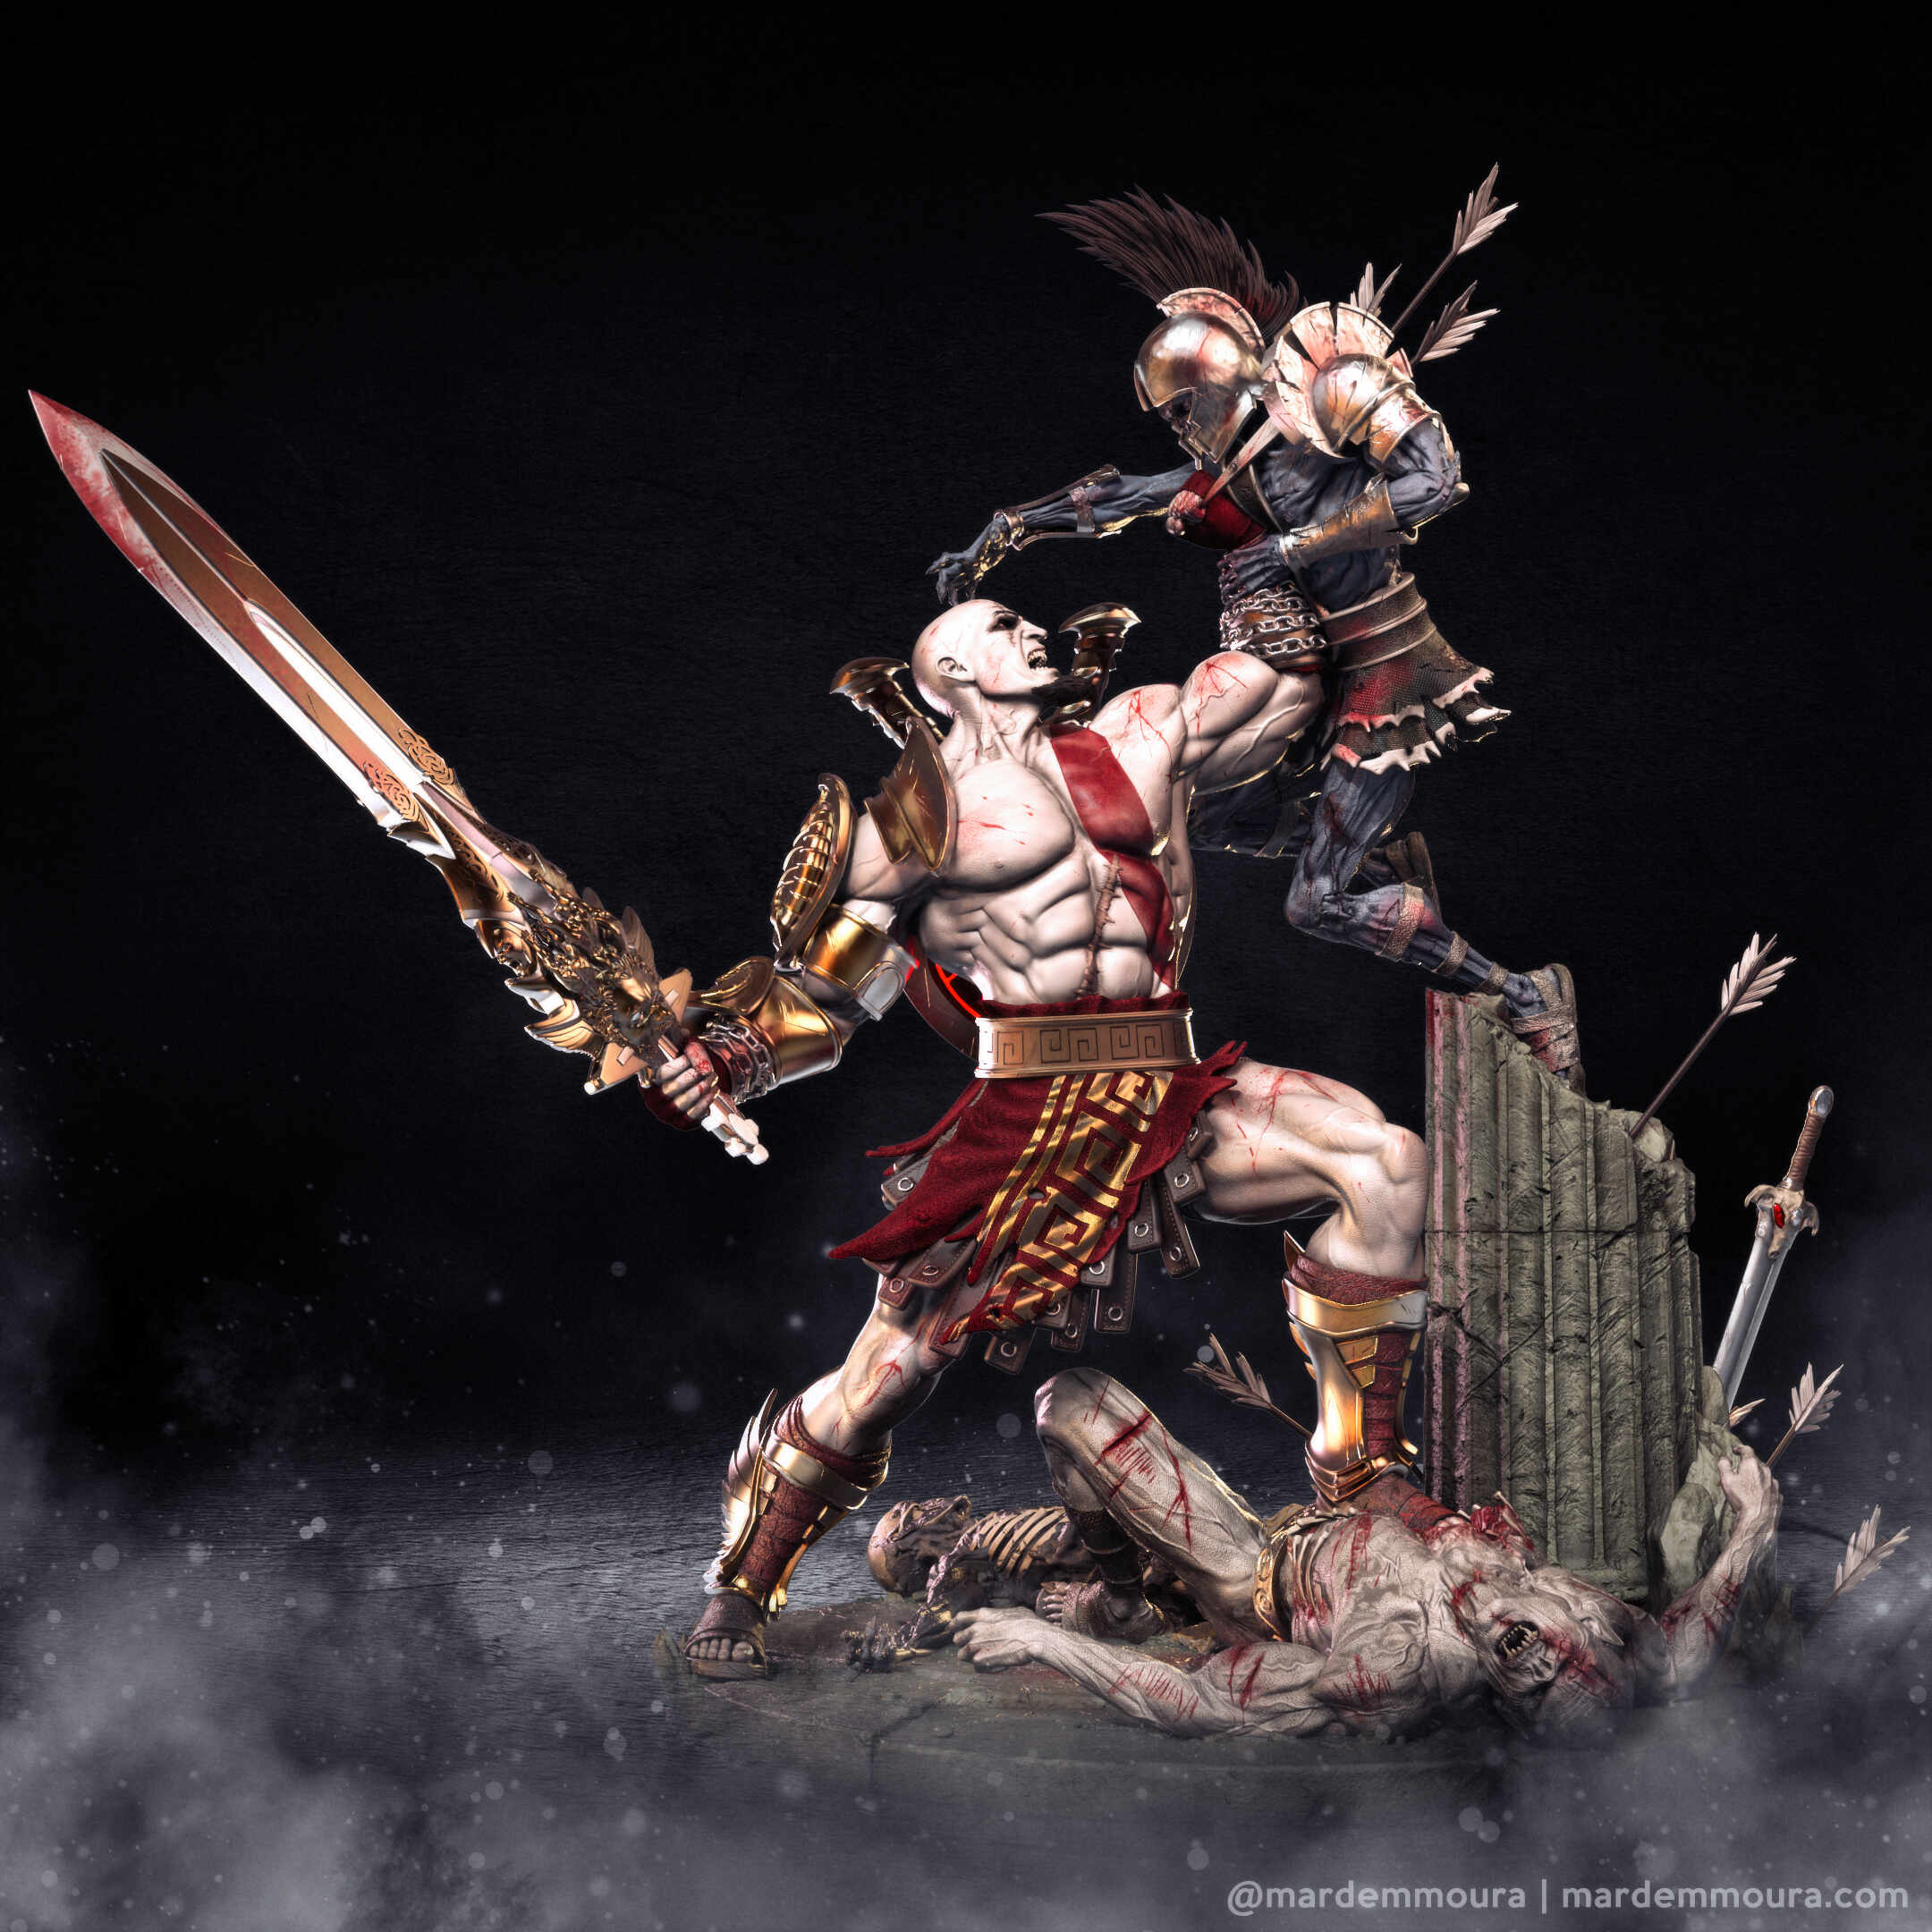 Does Kratos still have the Blade of Olympus?